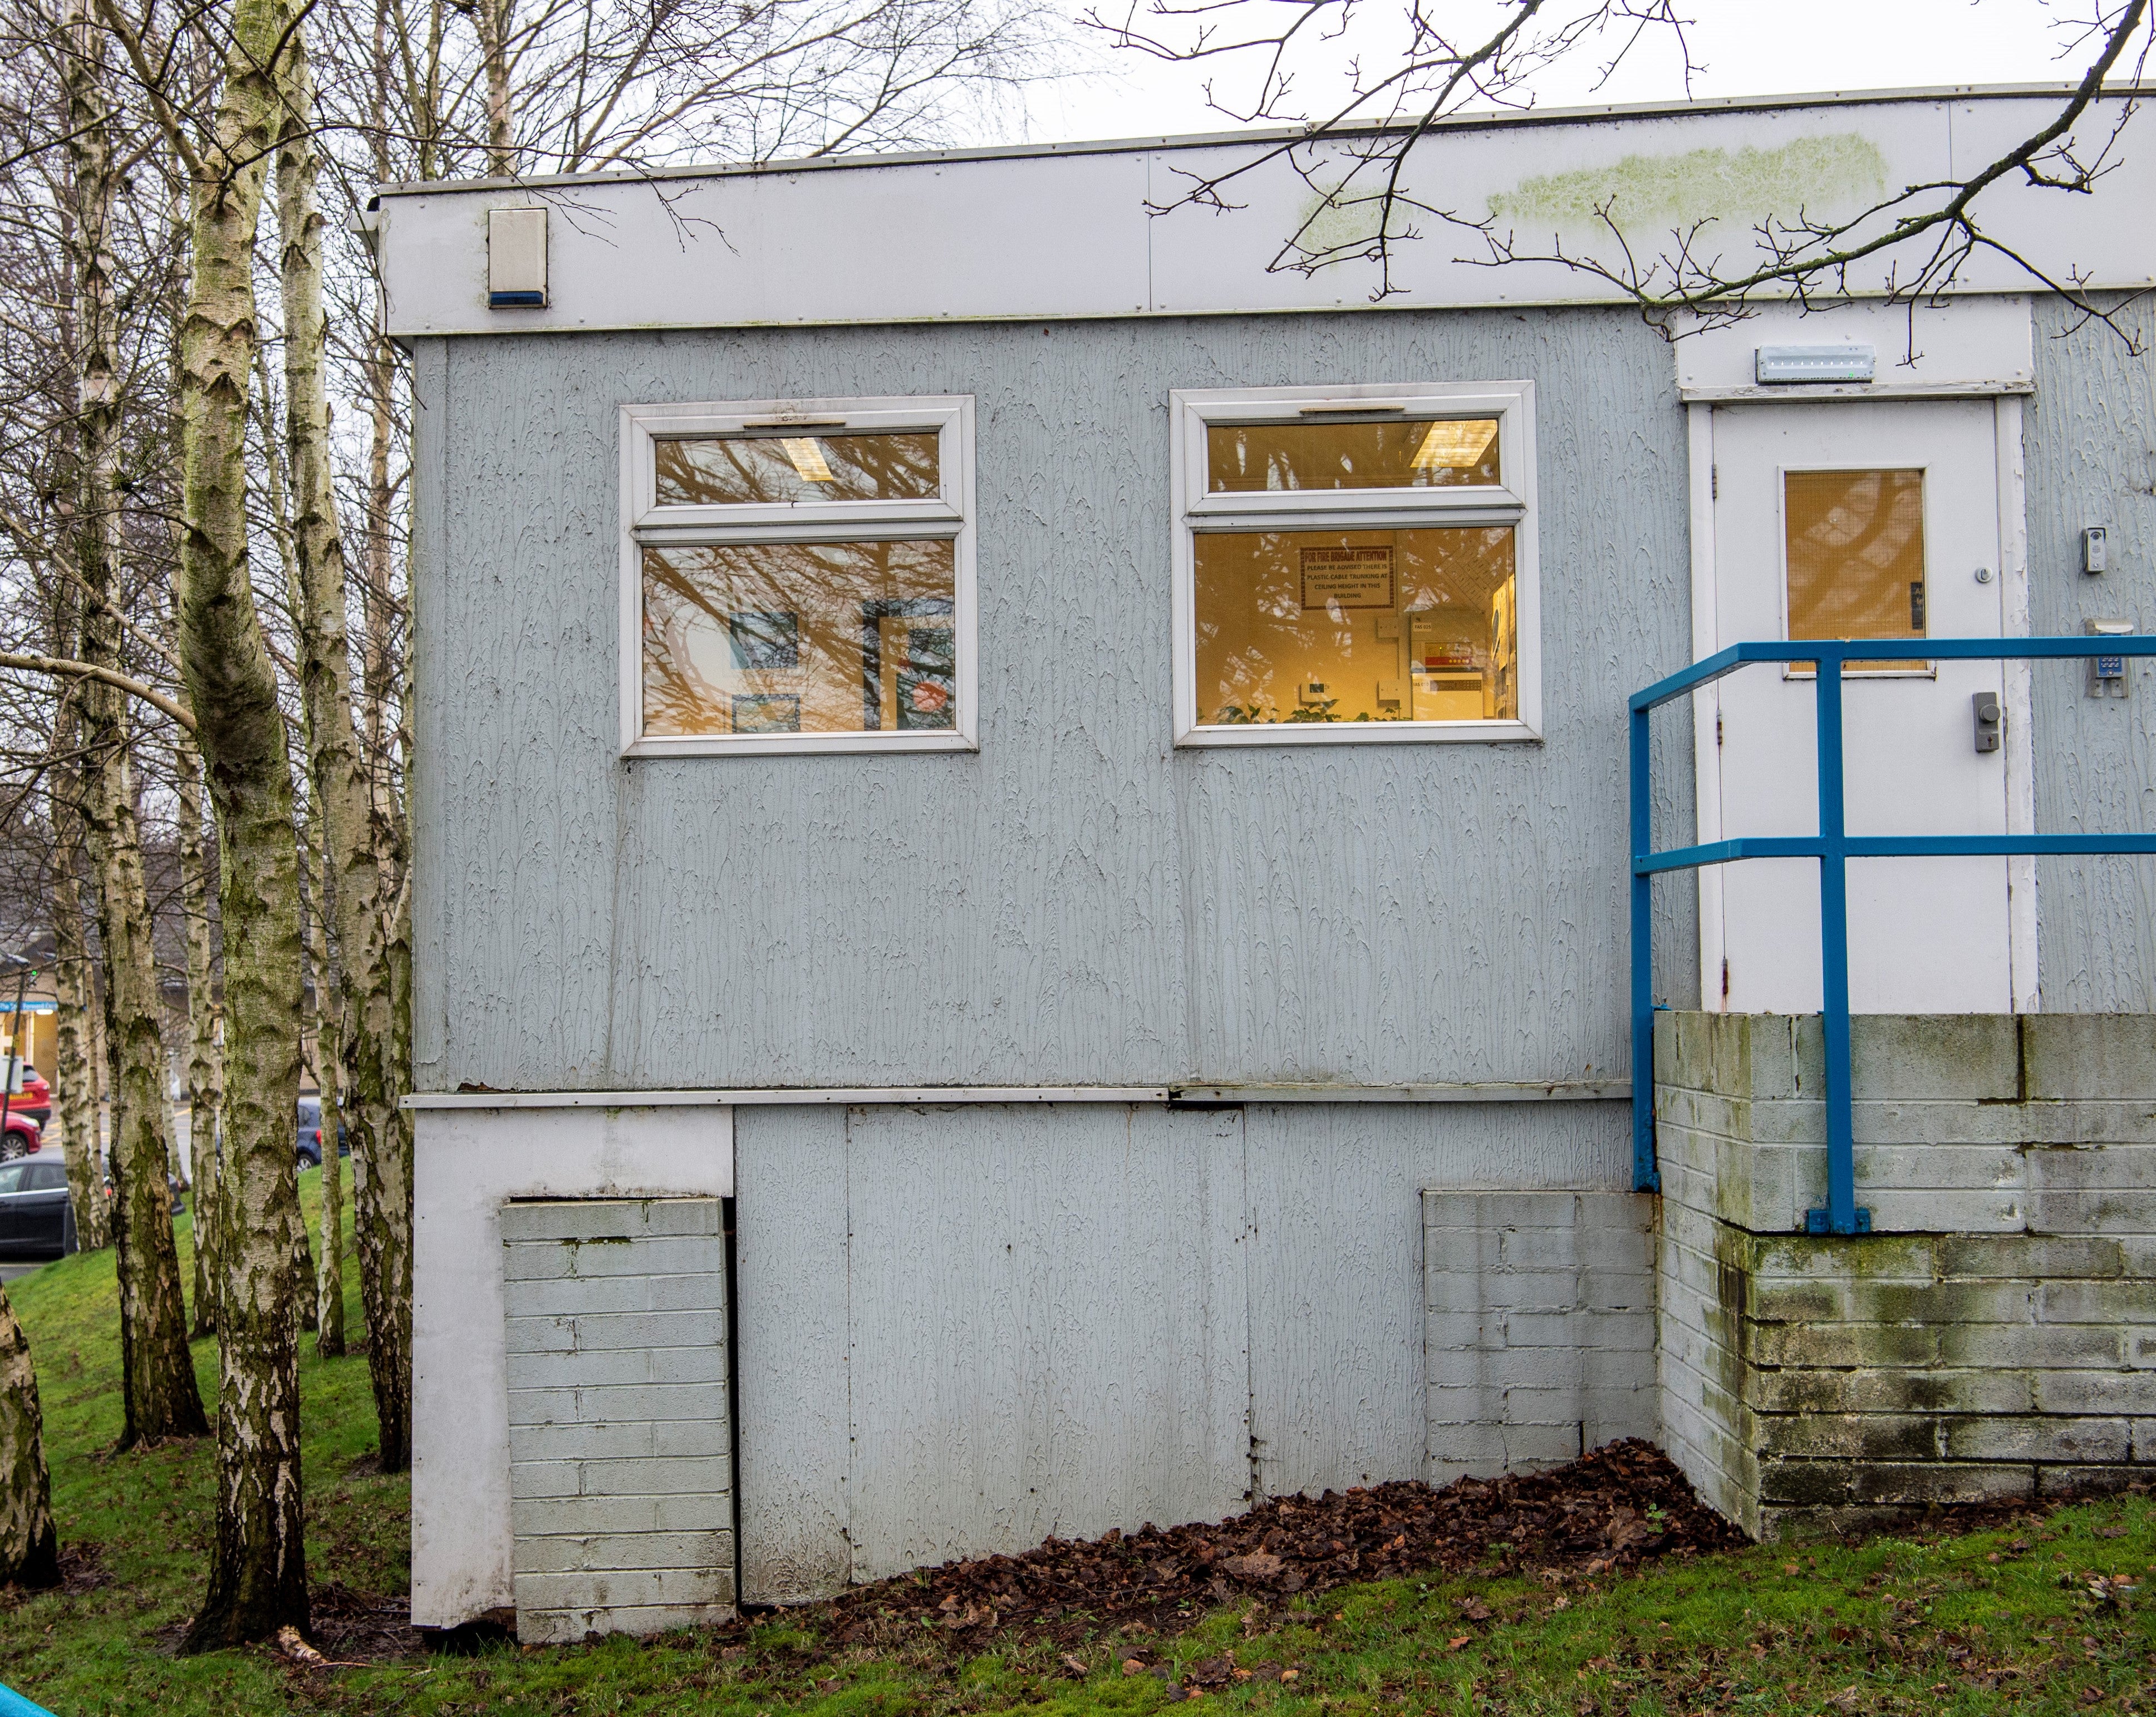 Lynfield Mount Hospital Psychotherapy Cabin, the 50 year old building was constructed in the 1970s